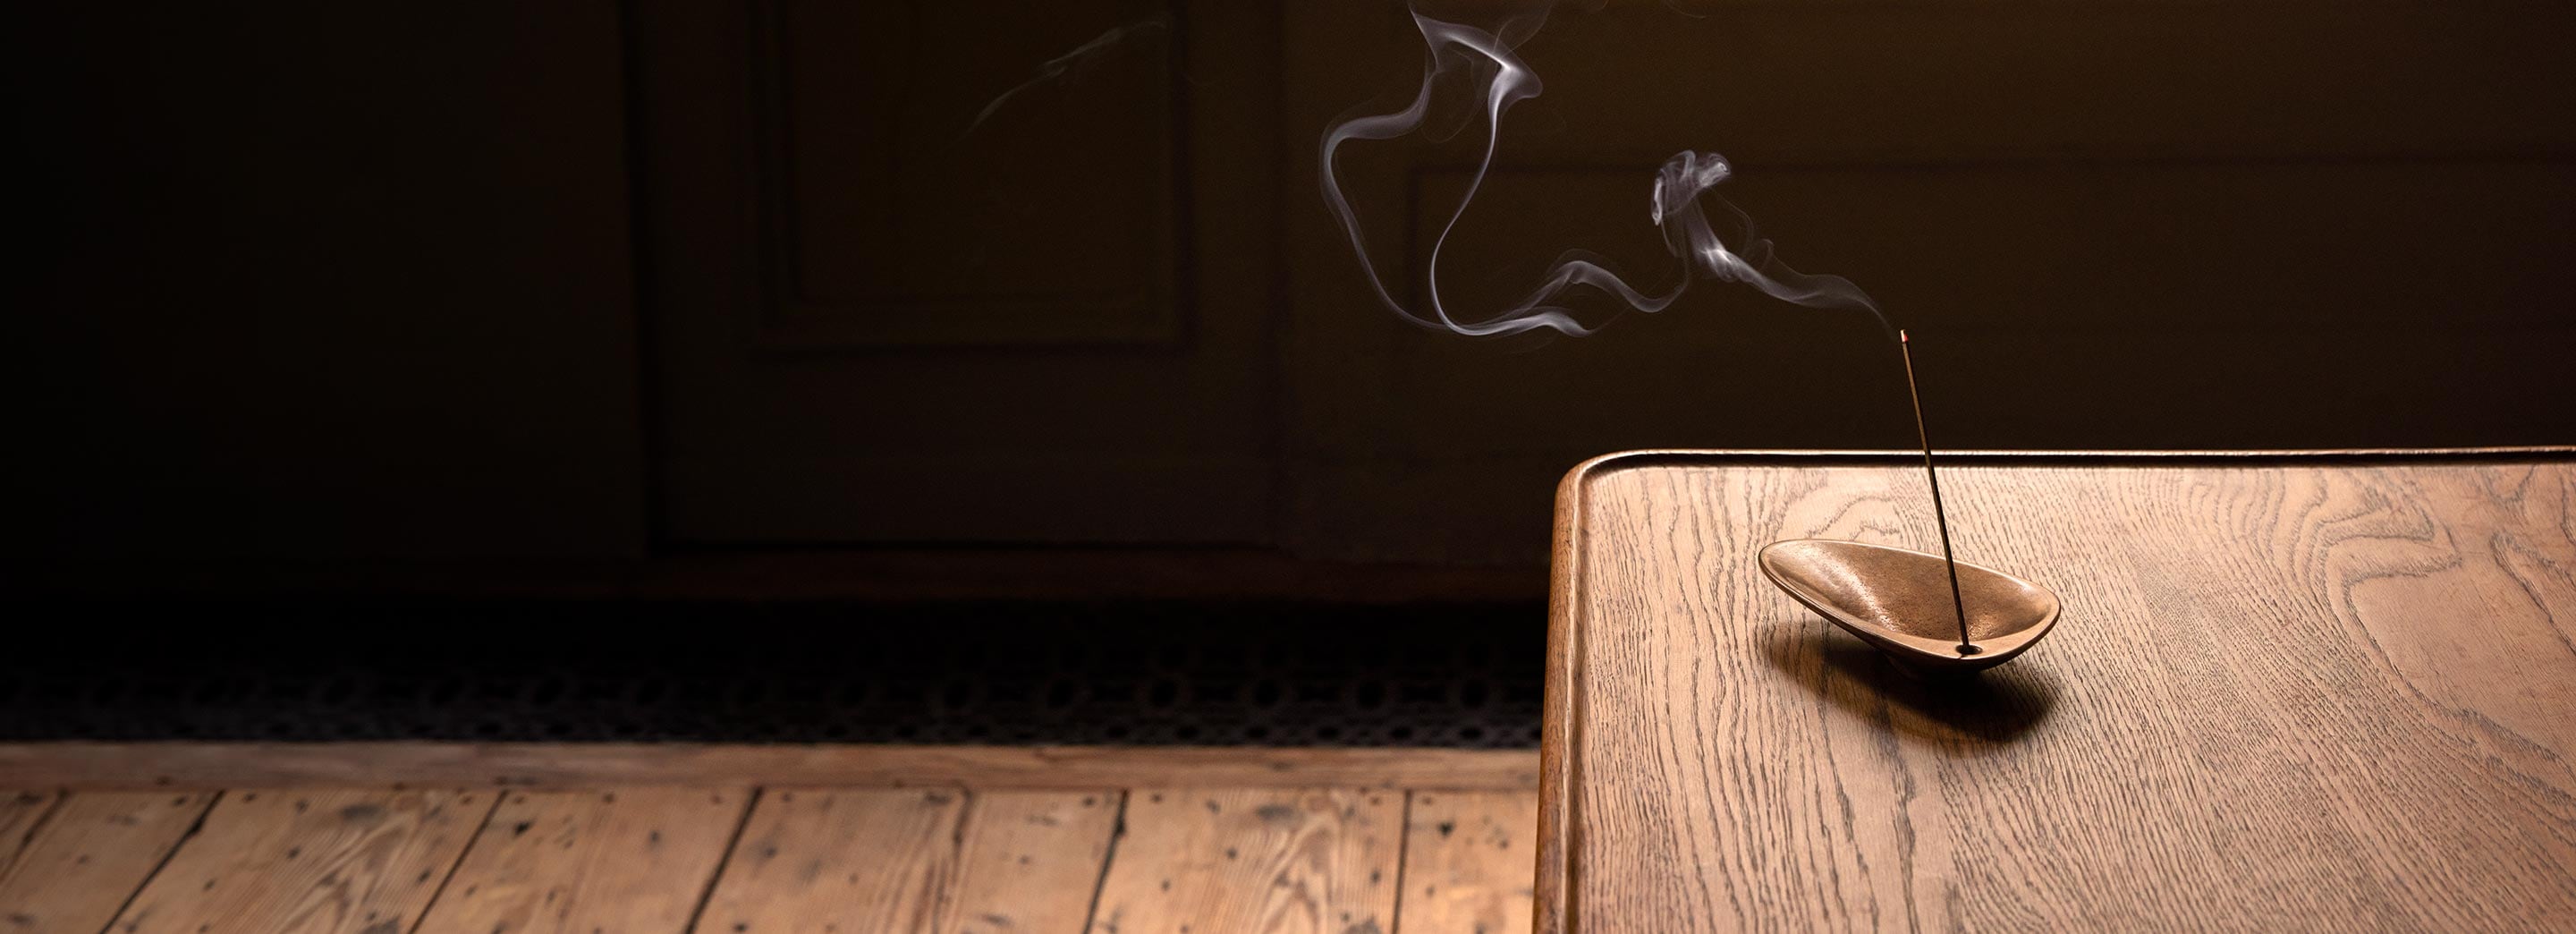 A lit stick of incense sitting alongside a mid-century chair.